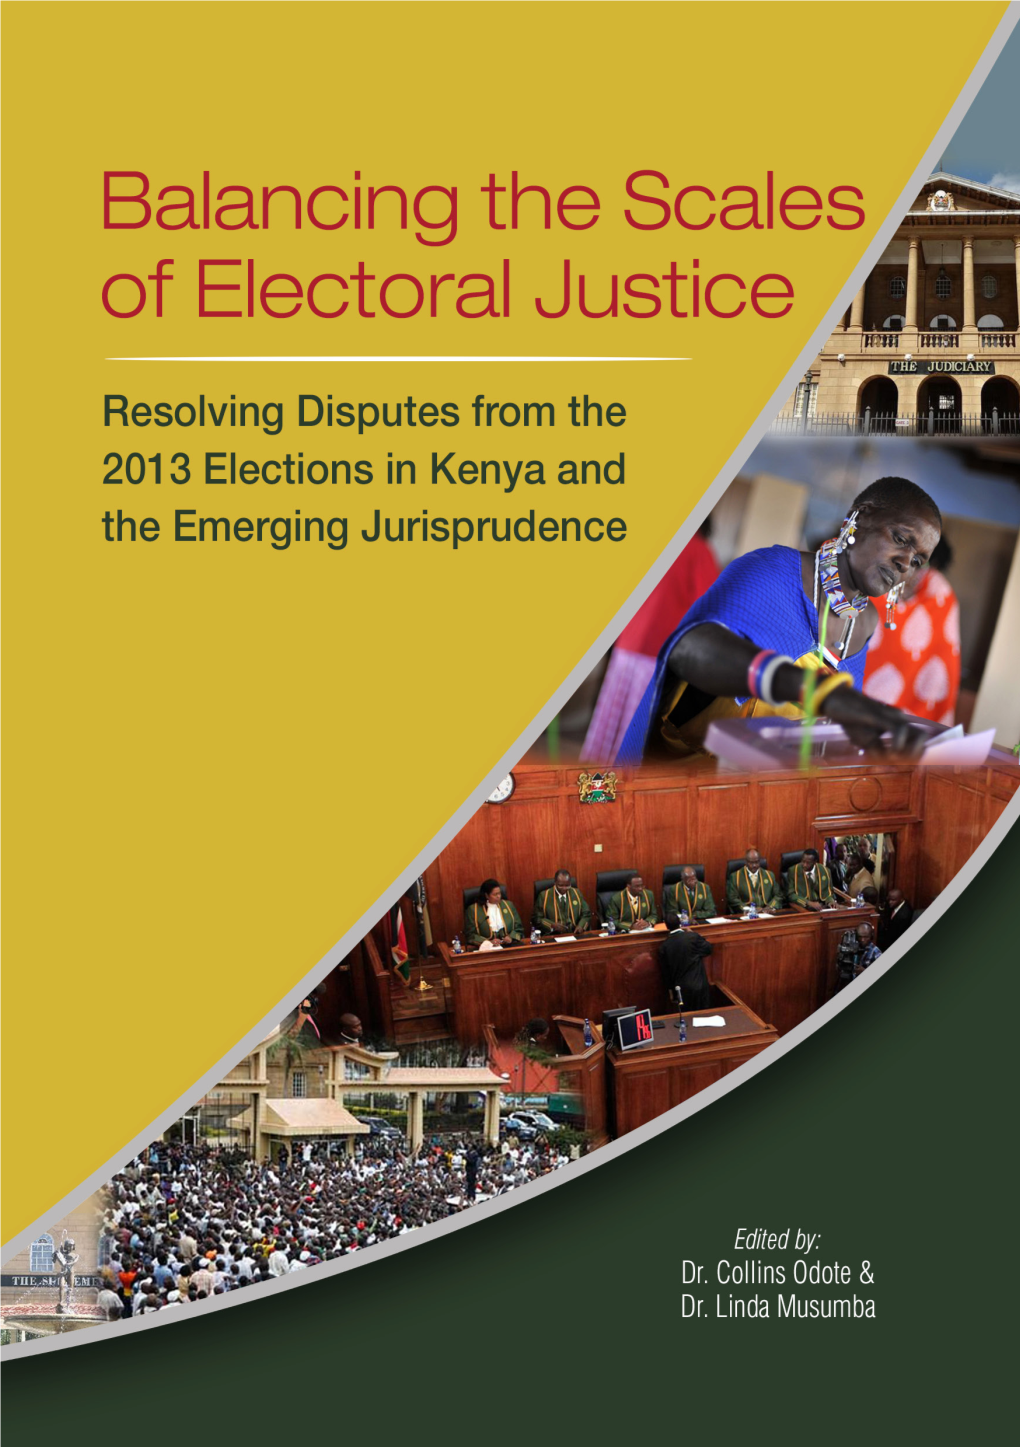 Balancing the Scales of Electoral Justice: 2013 Kenyan Election Disputes Resolution and Emerging Jurisprudence